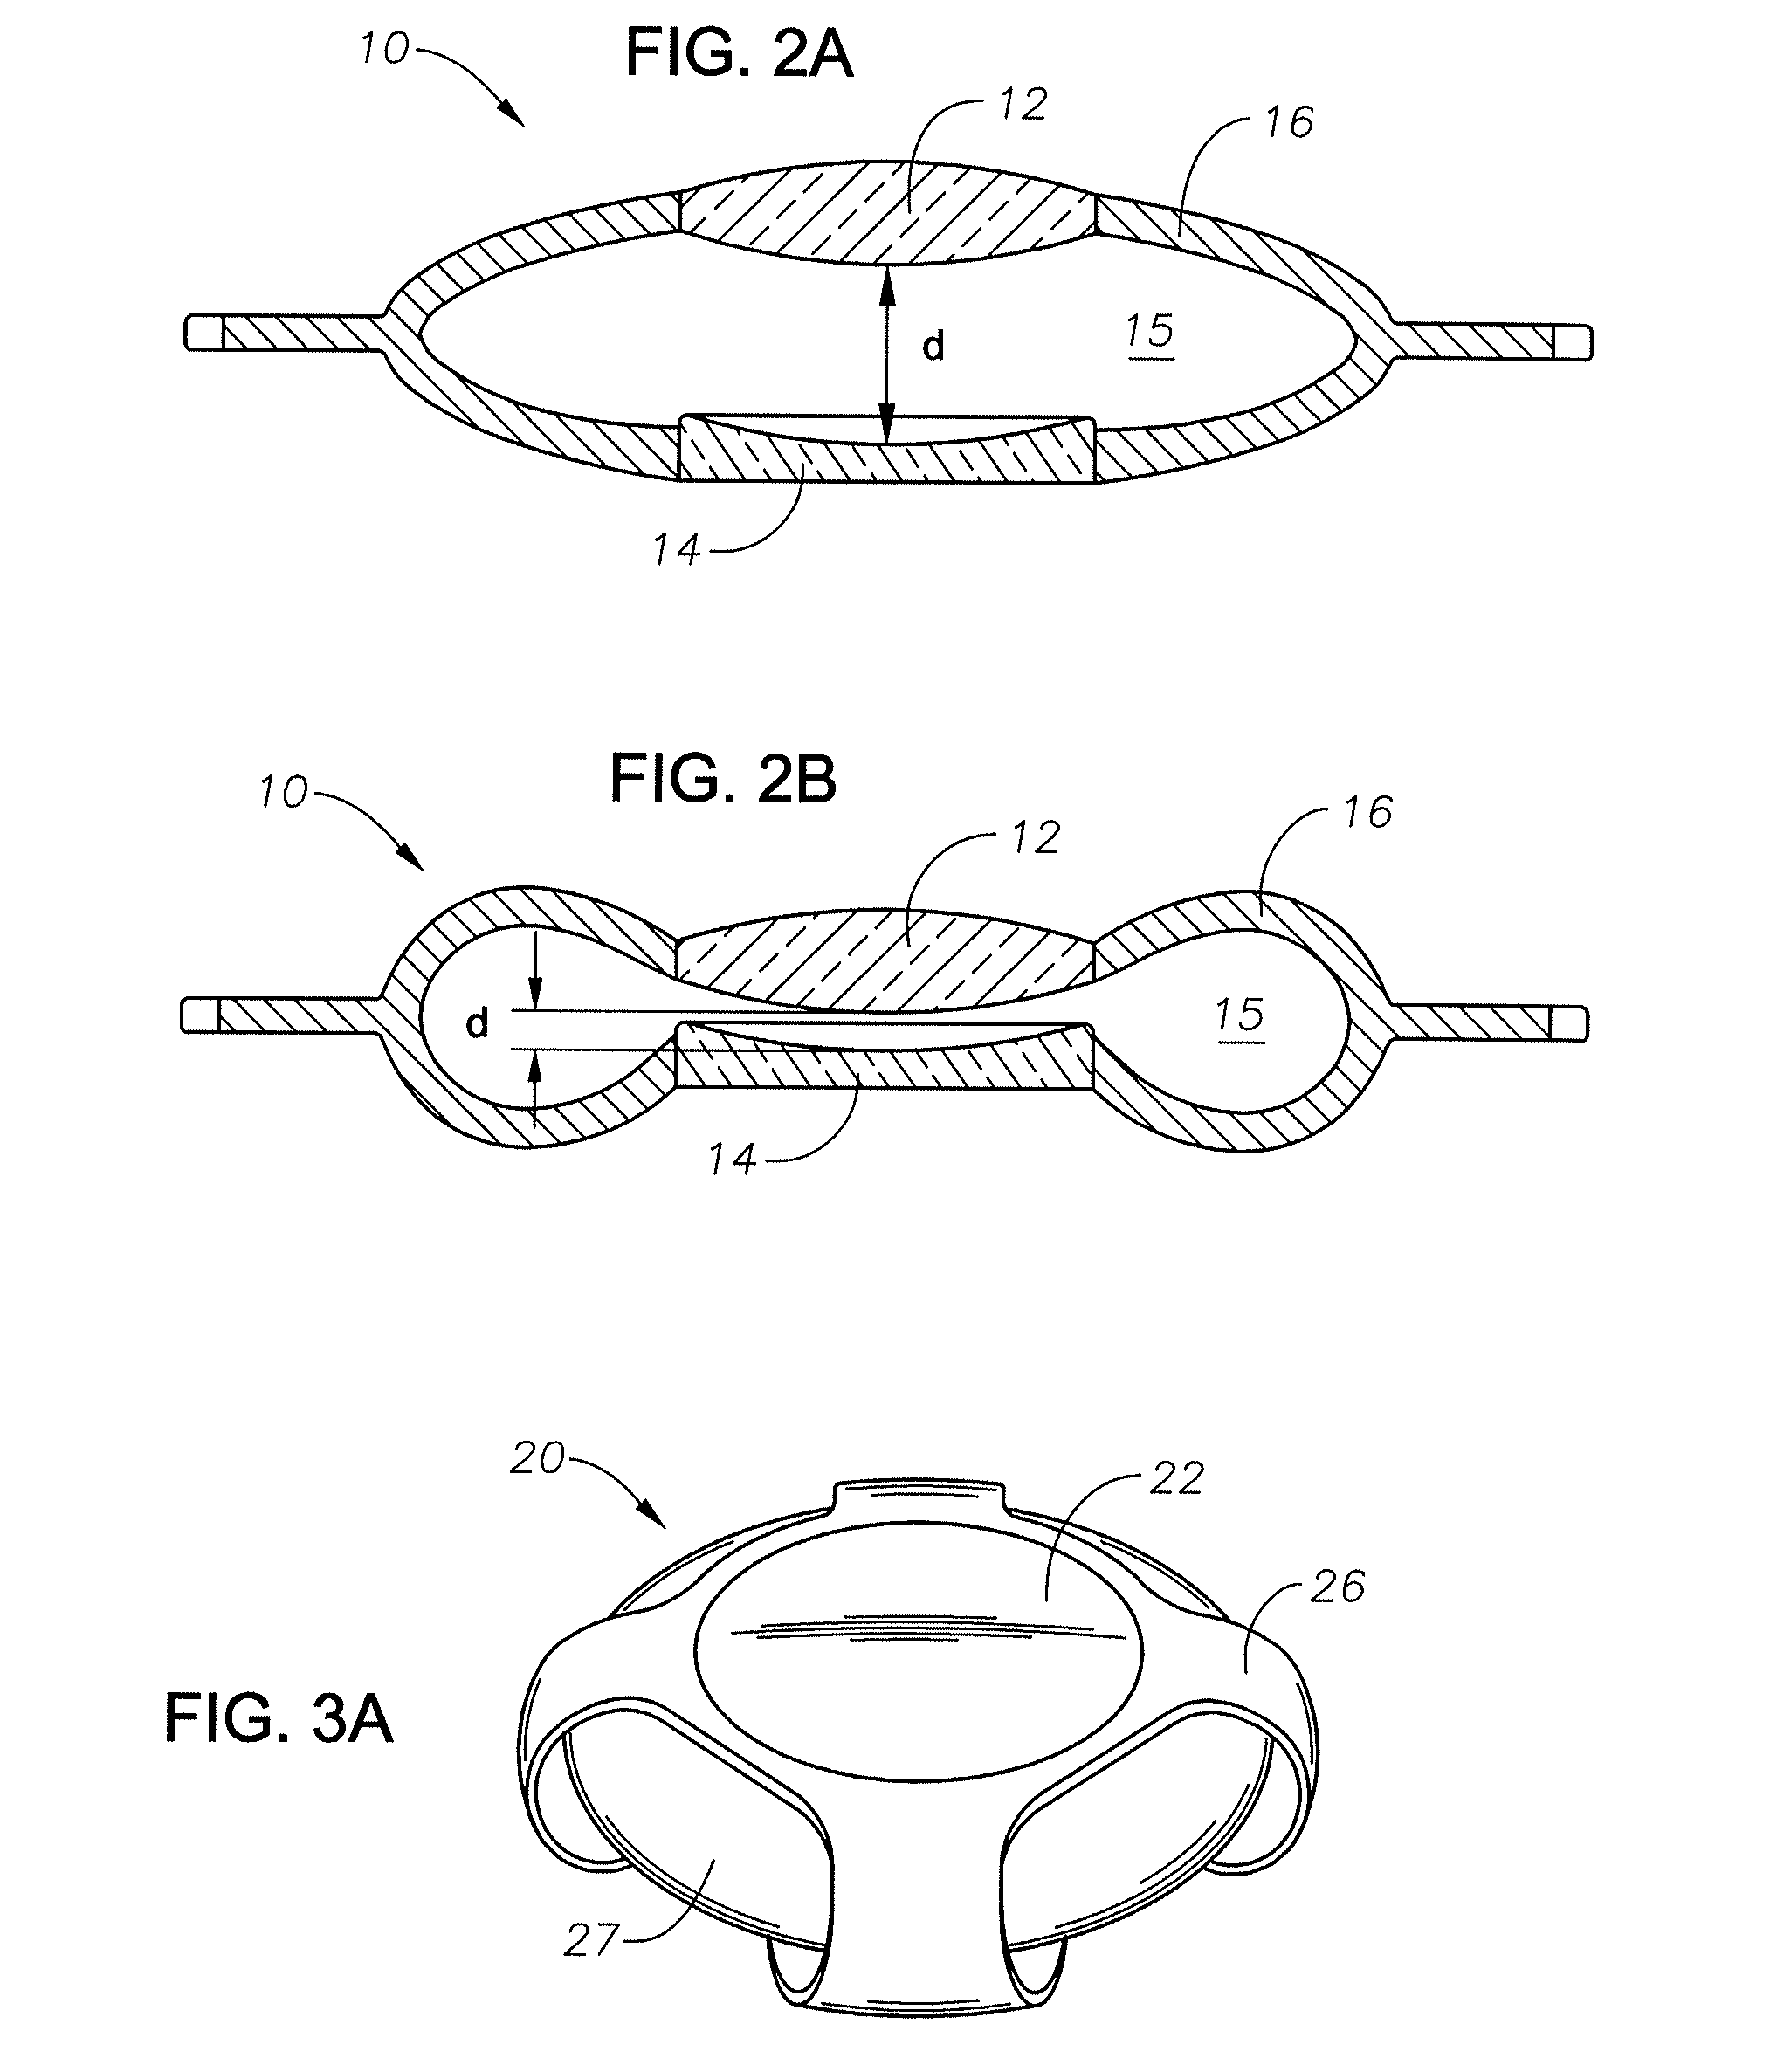 Dual optic accommodating iol with low refractive index gap material